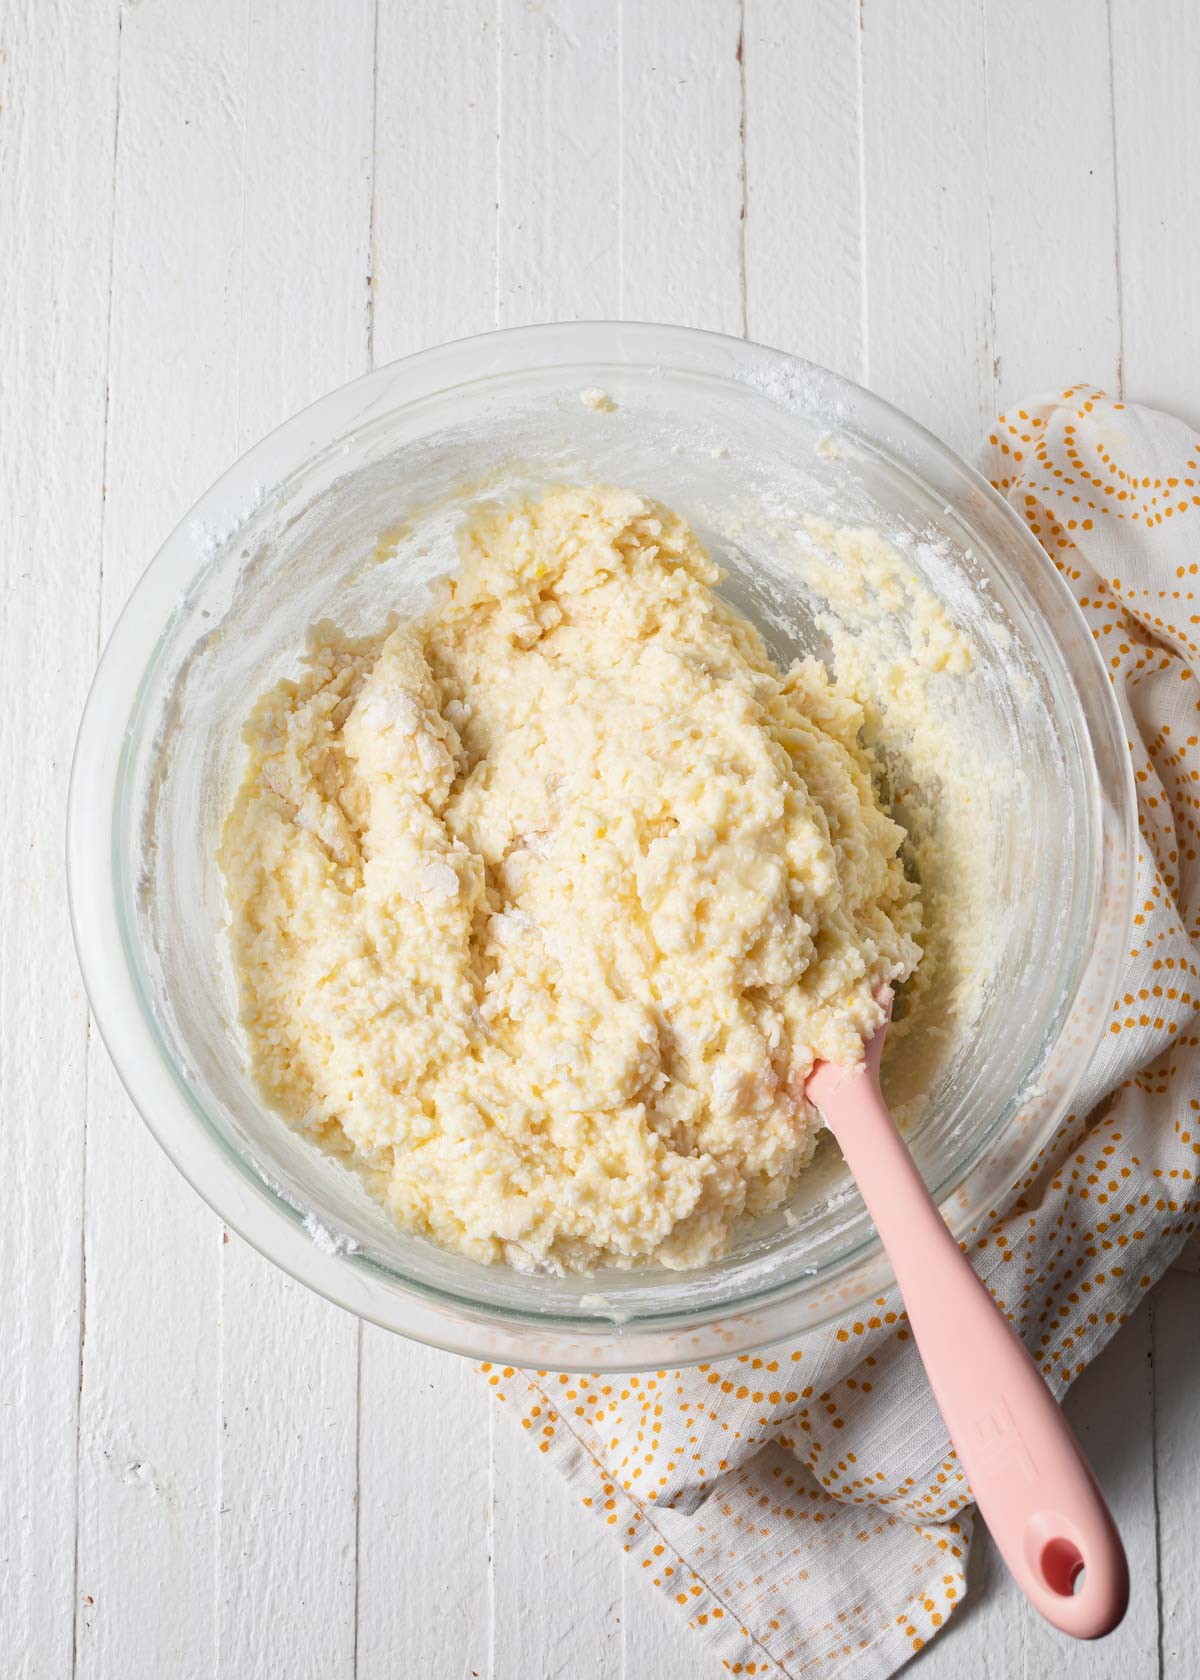 Mixing up ricotta cake batter in a glass bowl